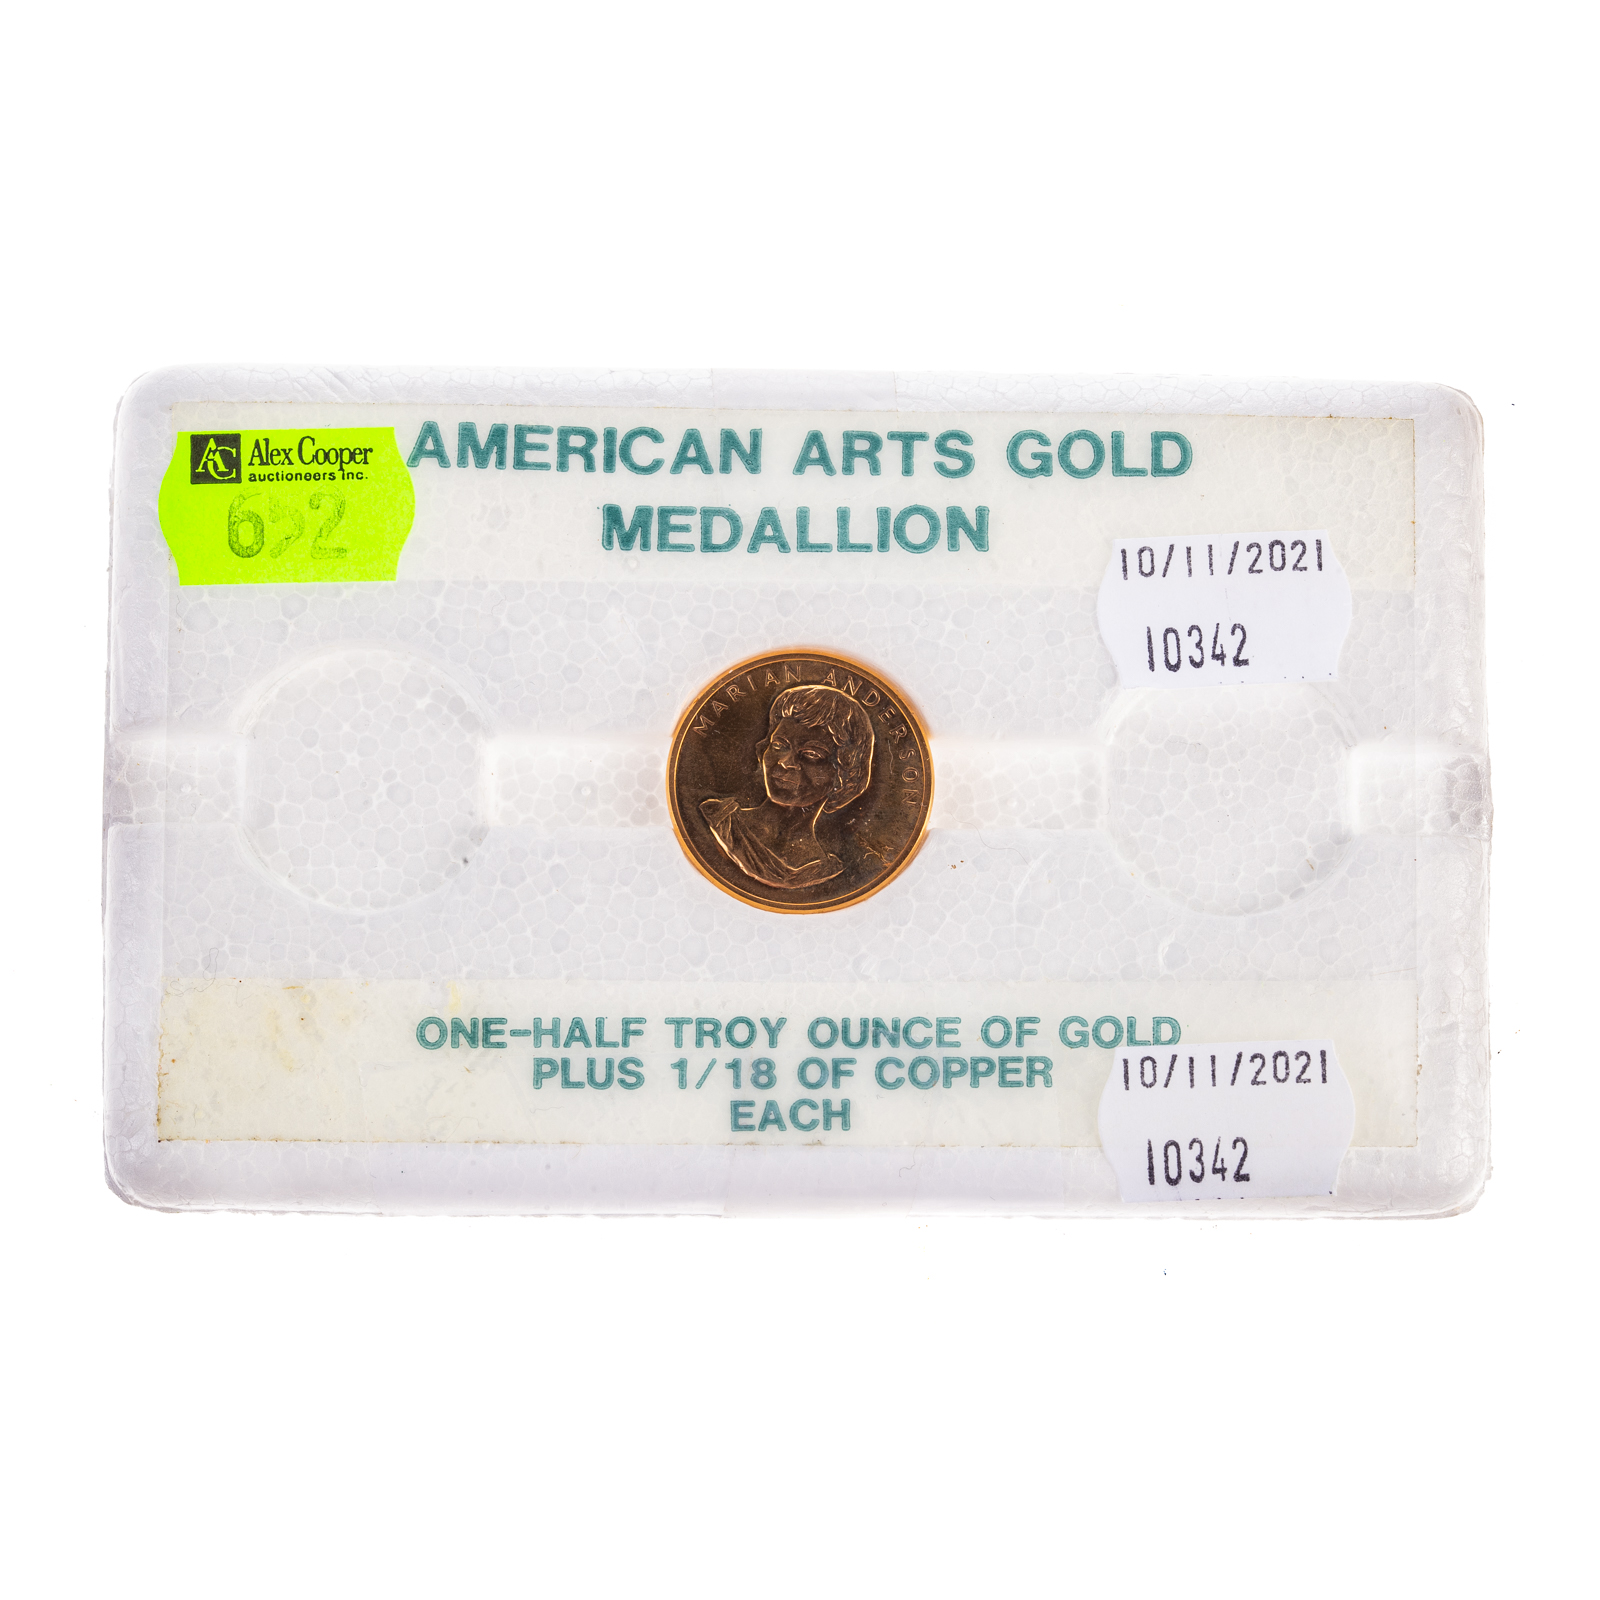 MARIAN ANDERSON 1 2 TROY OZ GOLD 29e137